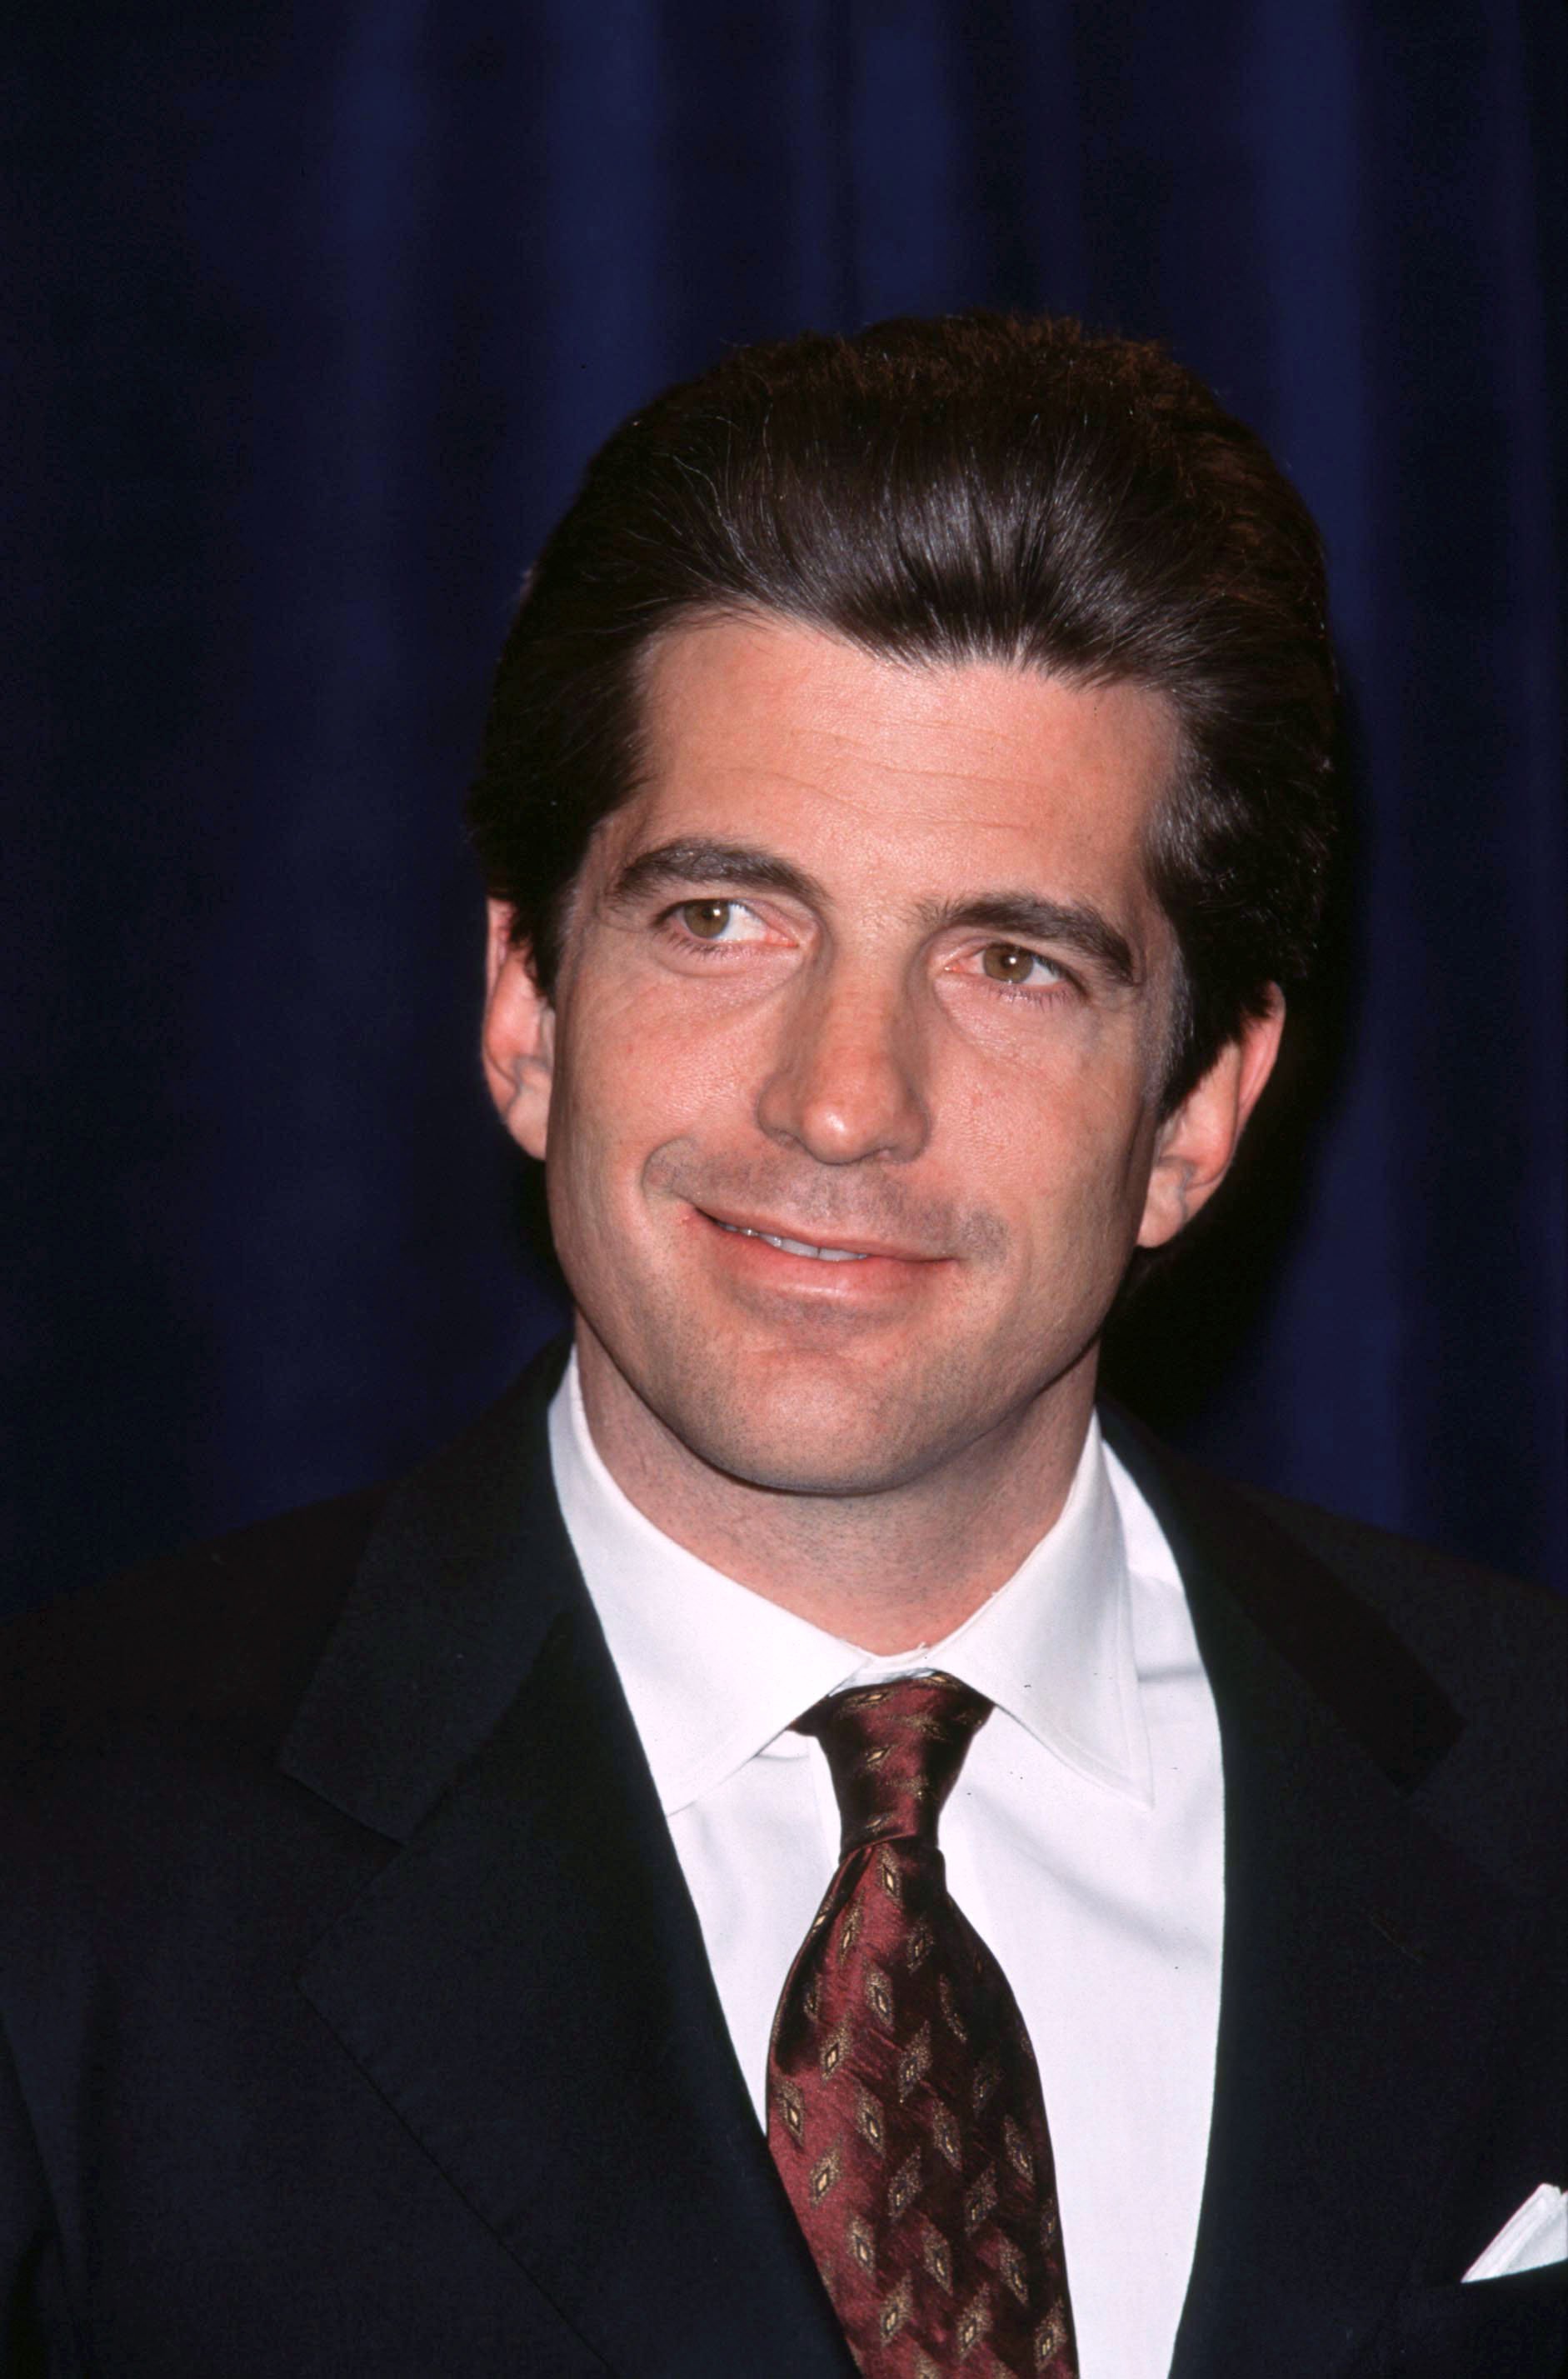 John F. Kennedy Jr. at the Jackie Robinson Foundation dinner in 1999. | Source: Getty Images